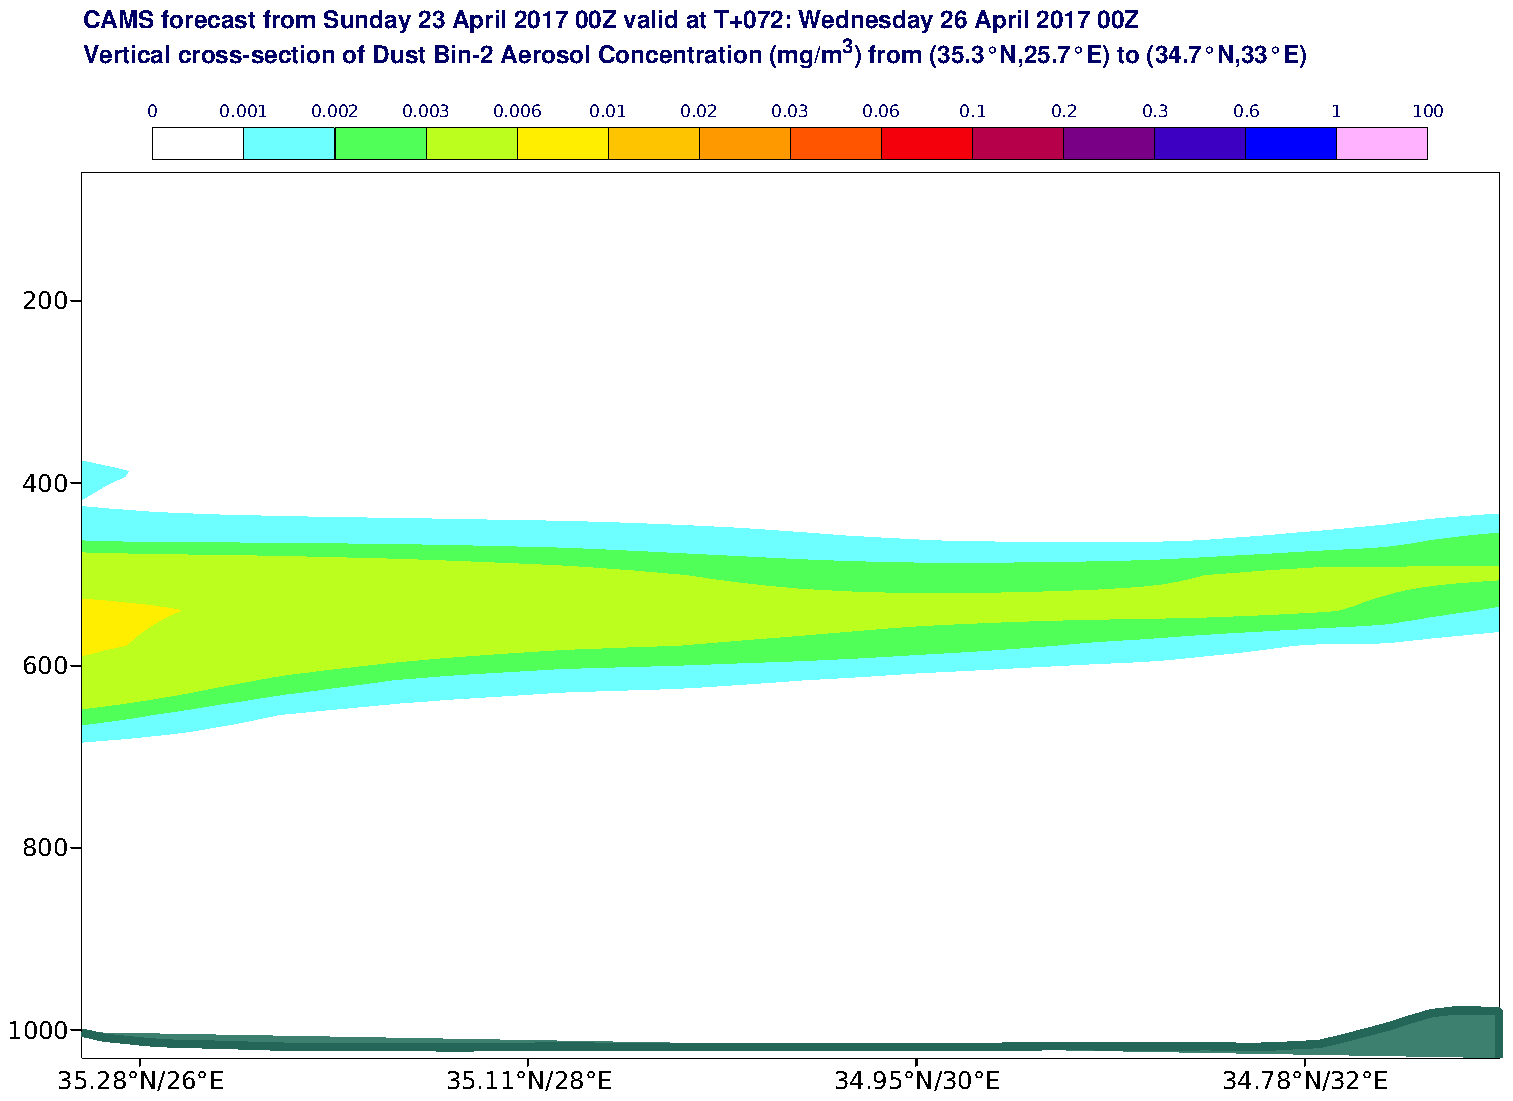 Vertical cross-section of Dust Bin-2 Aerosol Concentration (mg/m3) valid at T72 - 2017-04-26 00:00